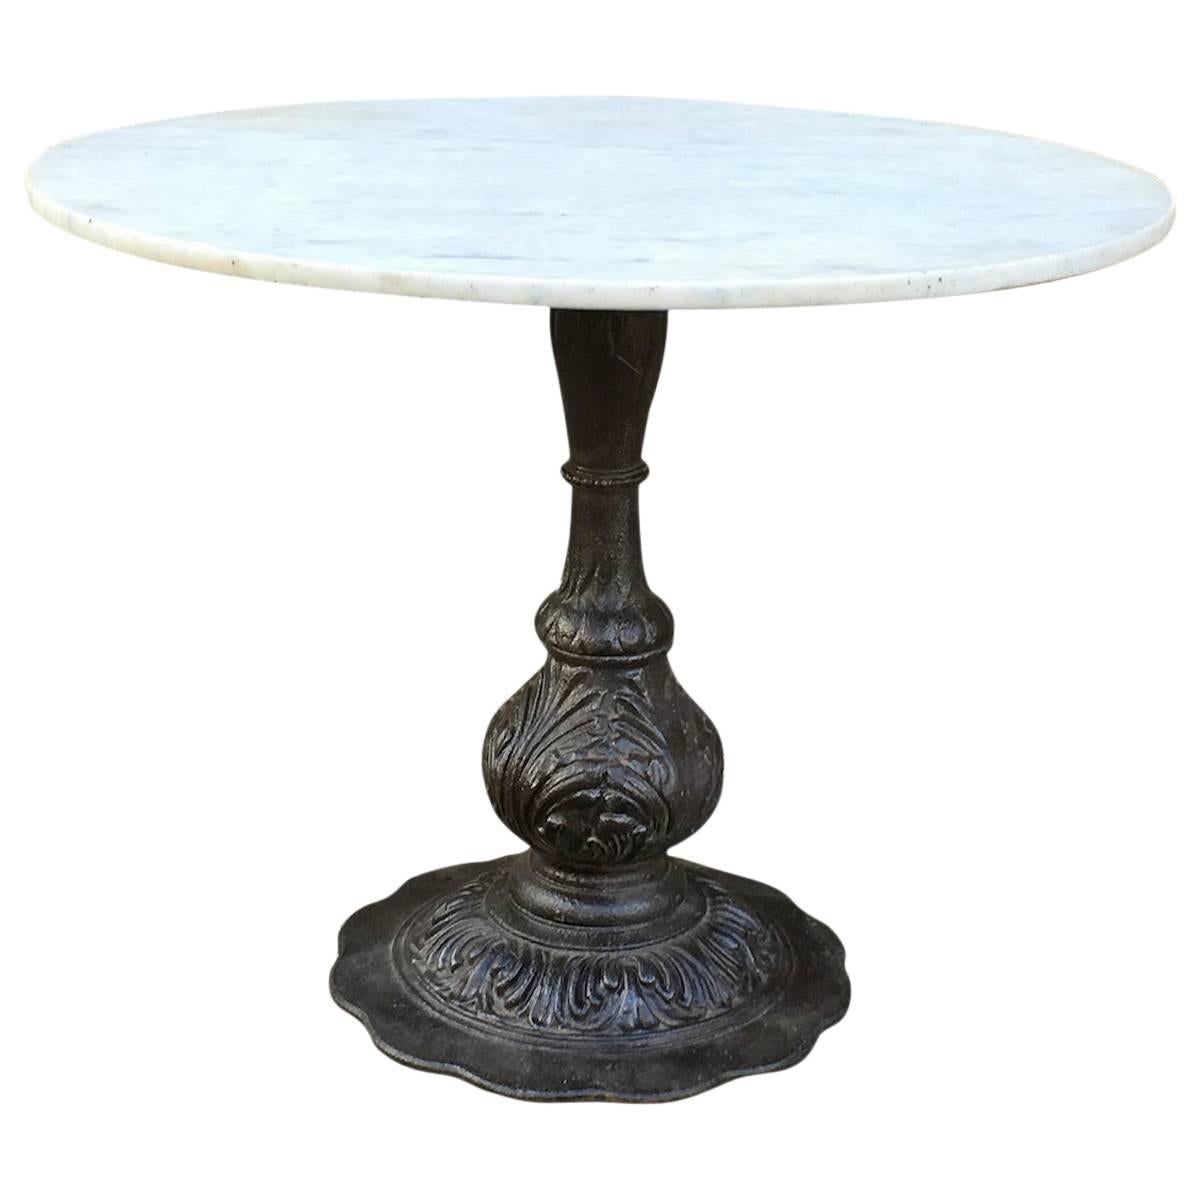 Marble Dining Table with Ornate Cast Iron Base